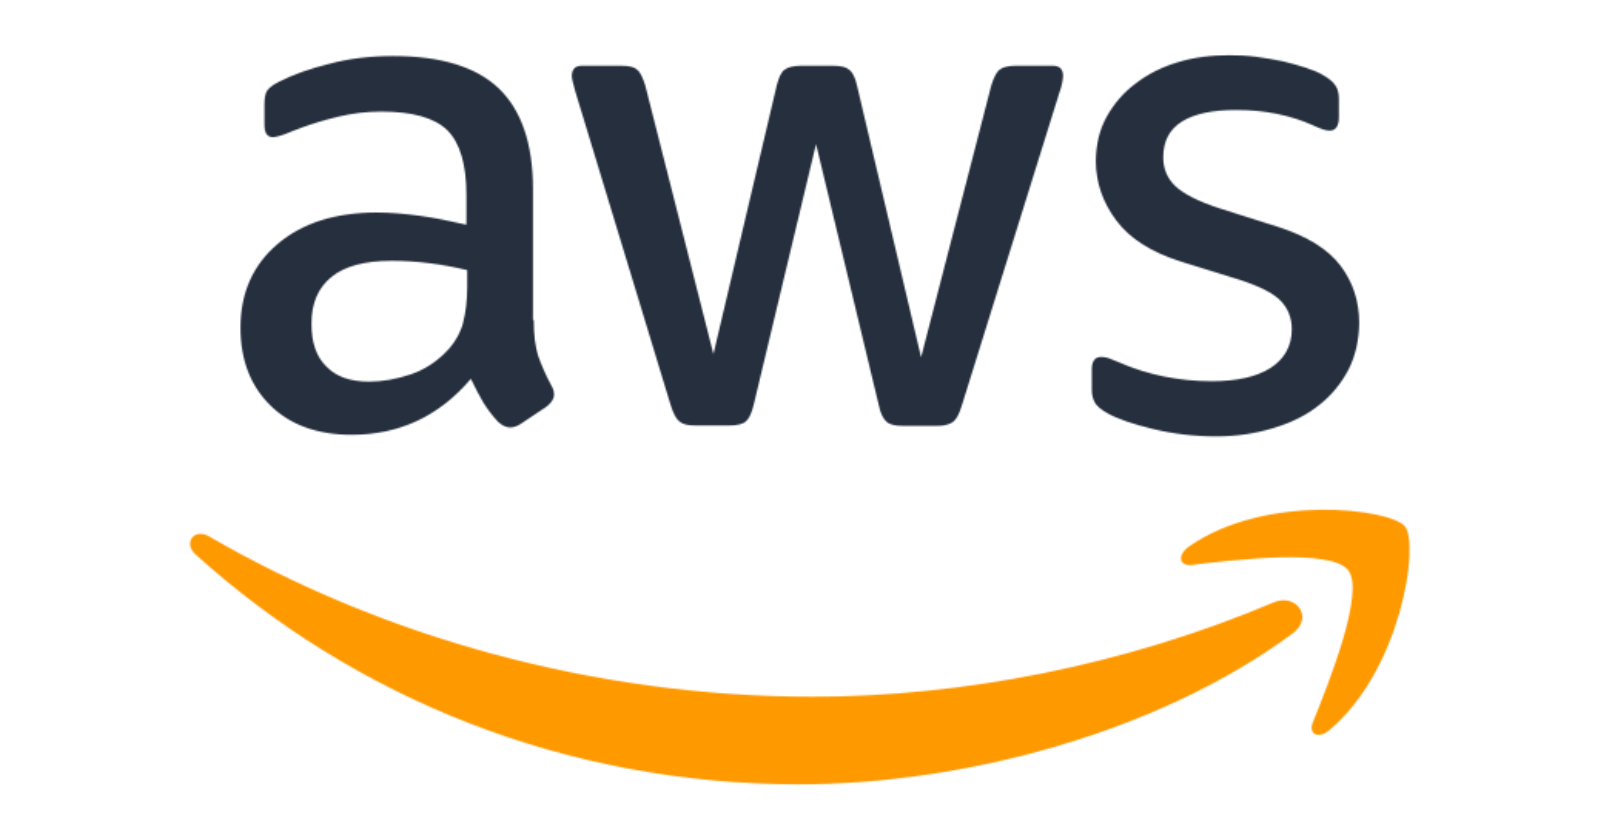 What are the main group of services in AWS